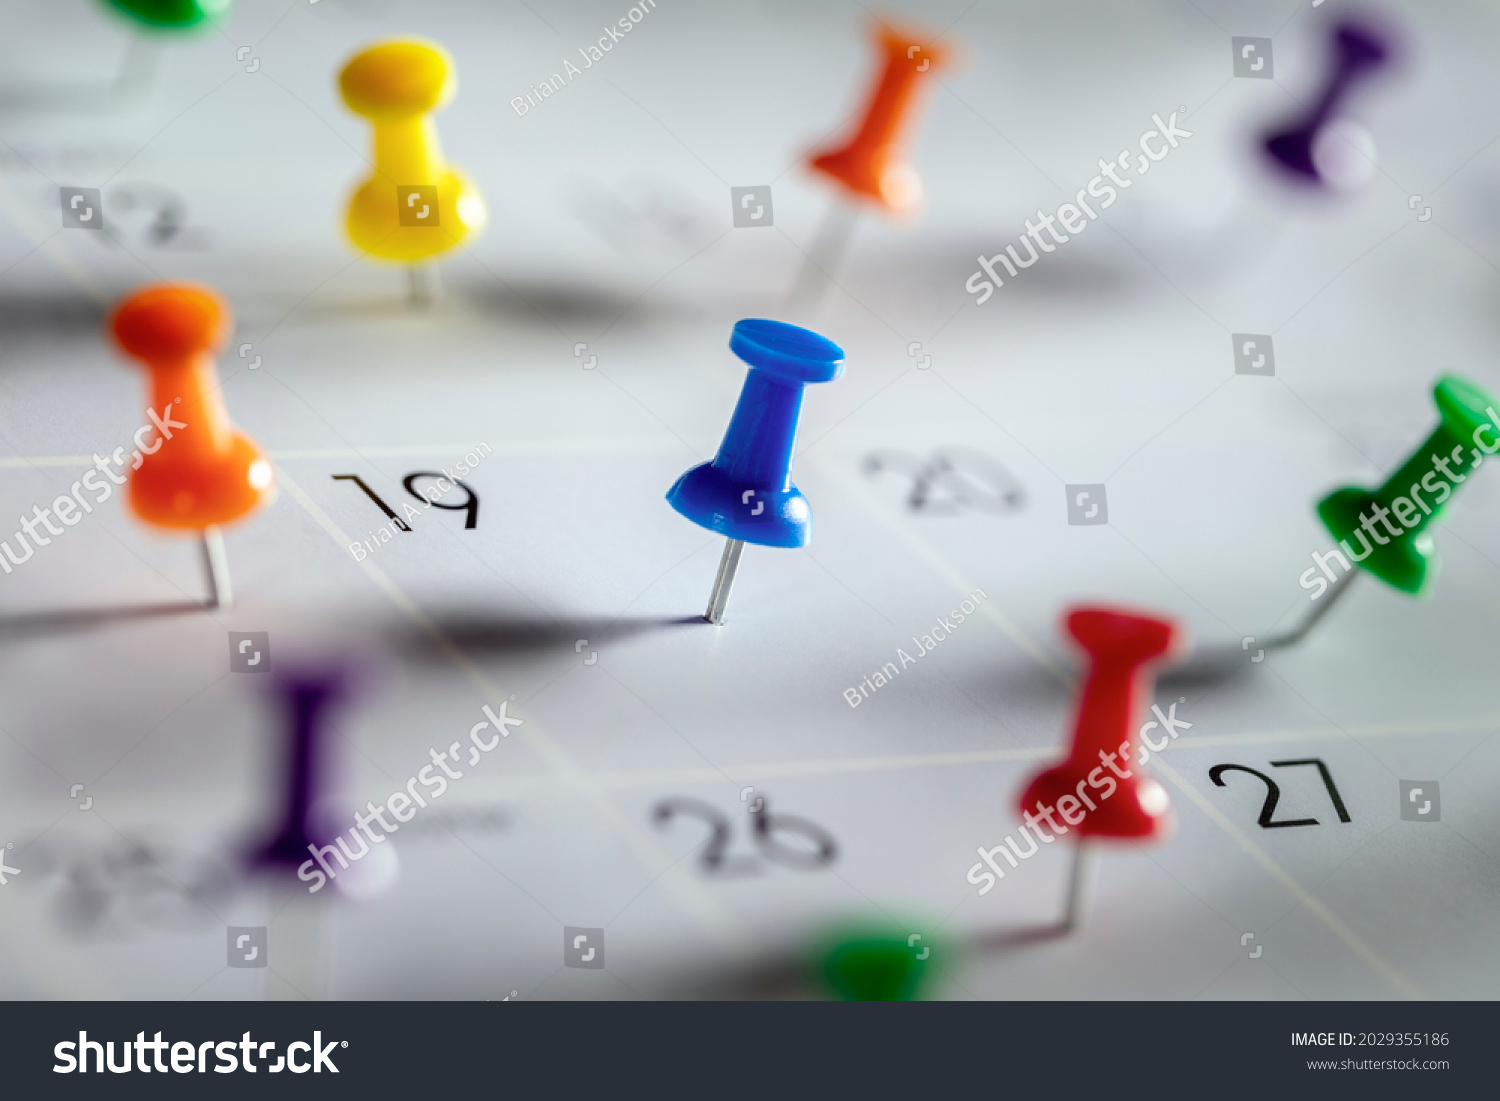 Thumbtack in calendar concept for busy, appointment and meeting reminder #2029355186